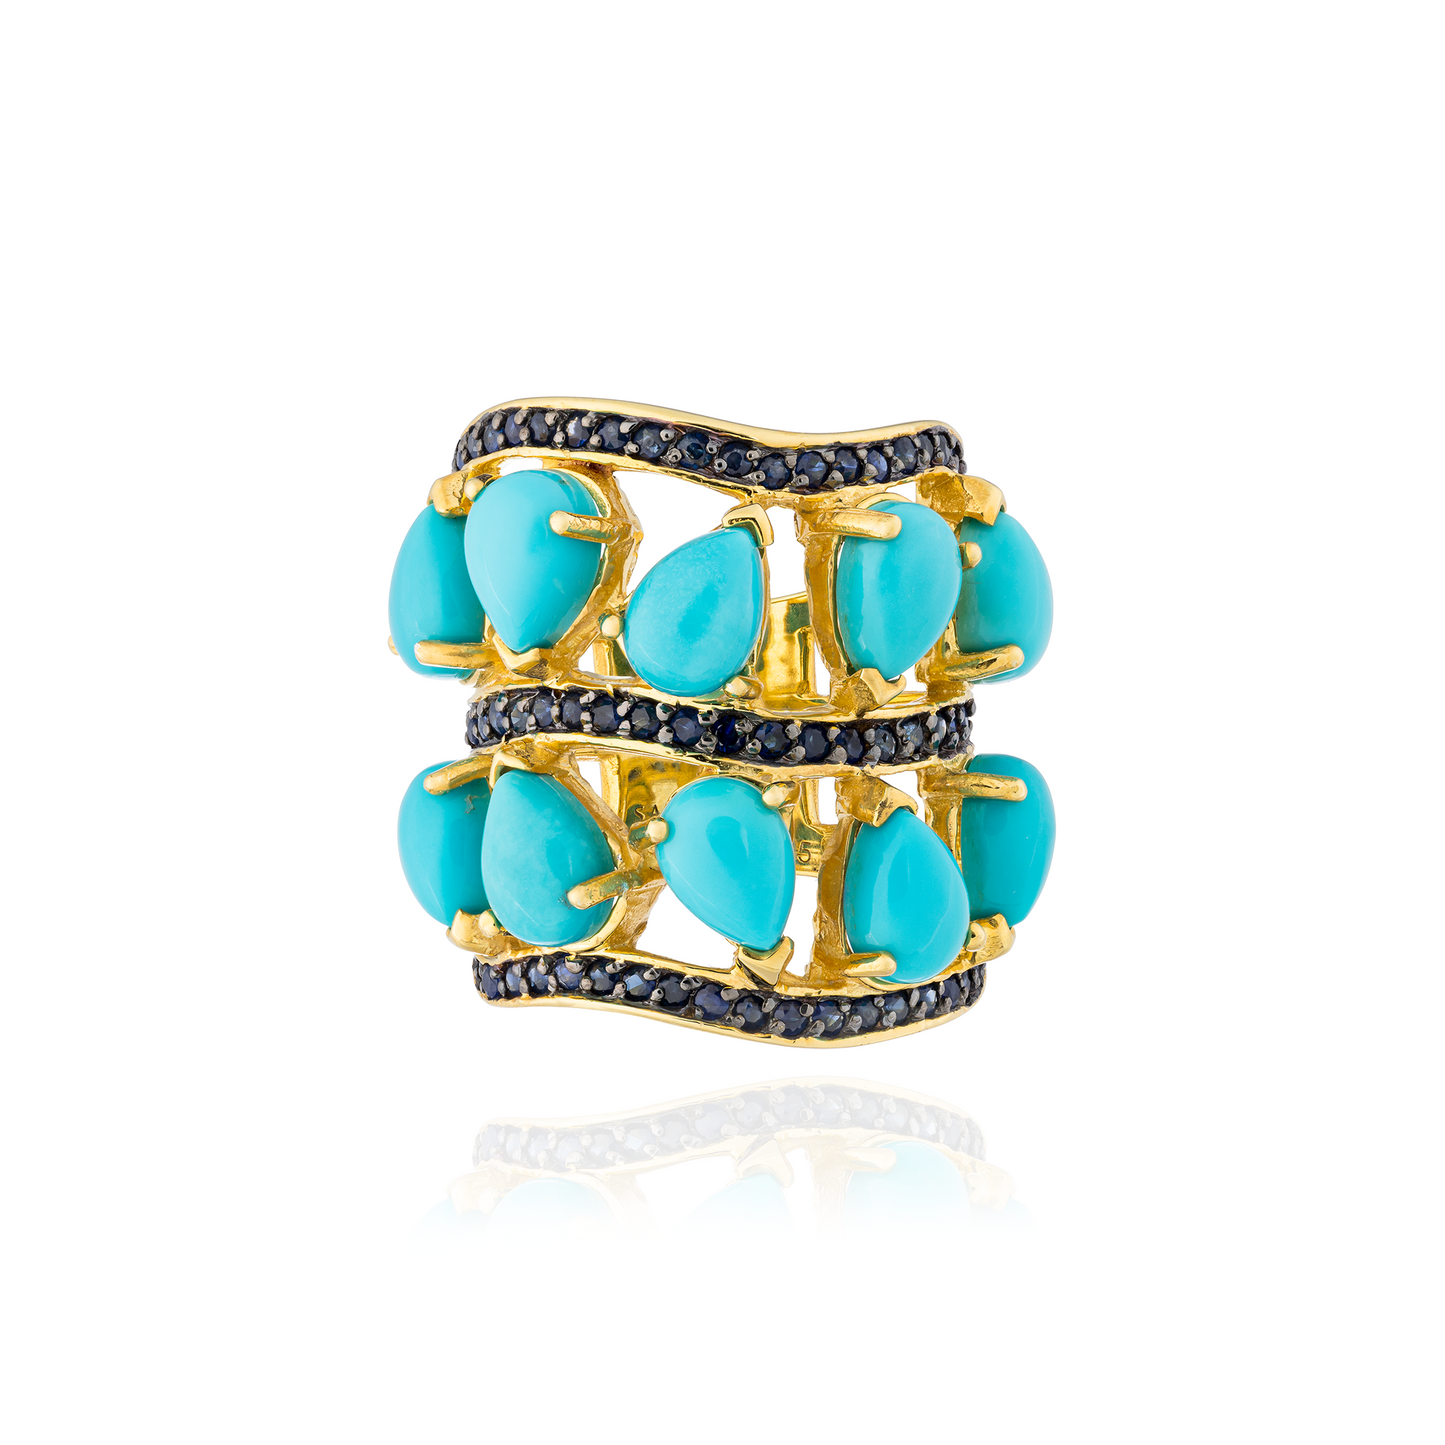 Floret 925 Silver Ring with Pear Shaped Turquoise & Blue Sapphire Pavé